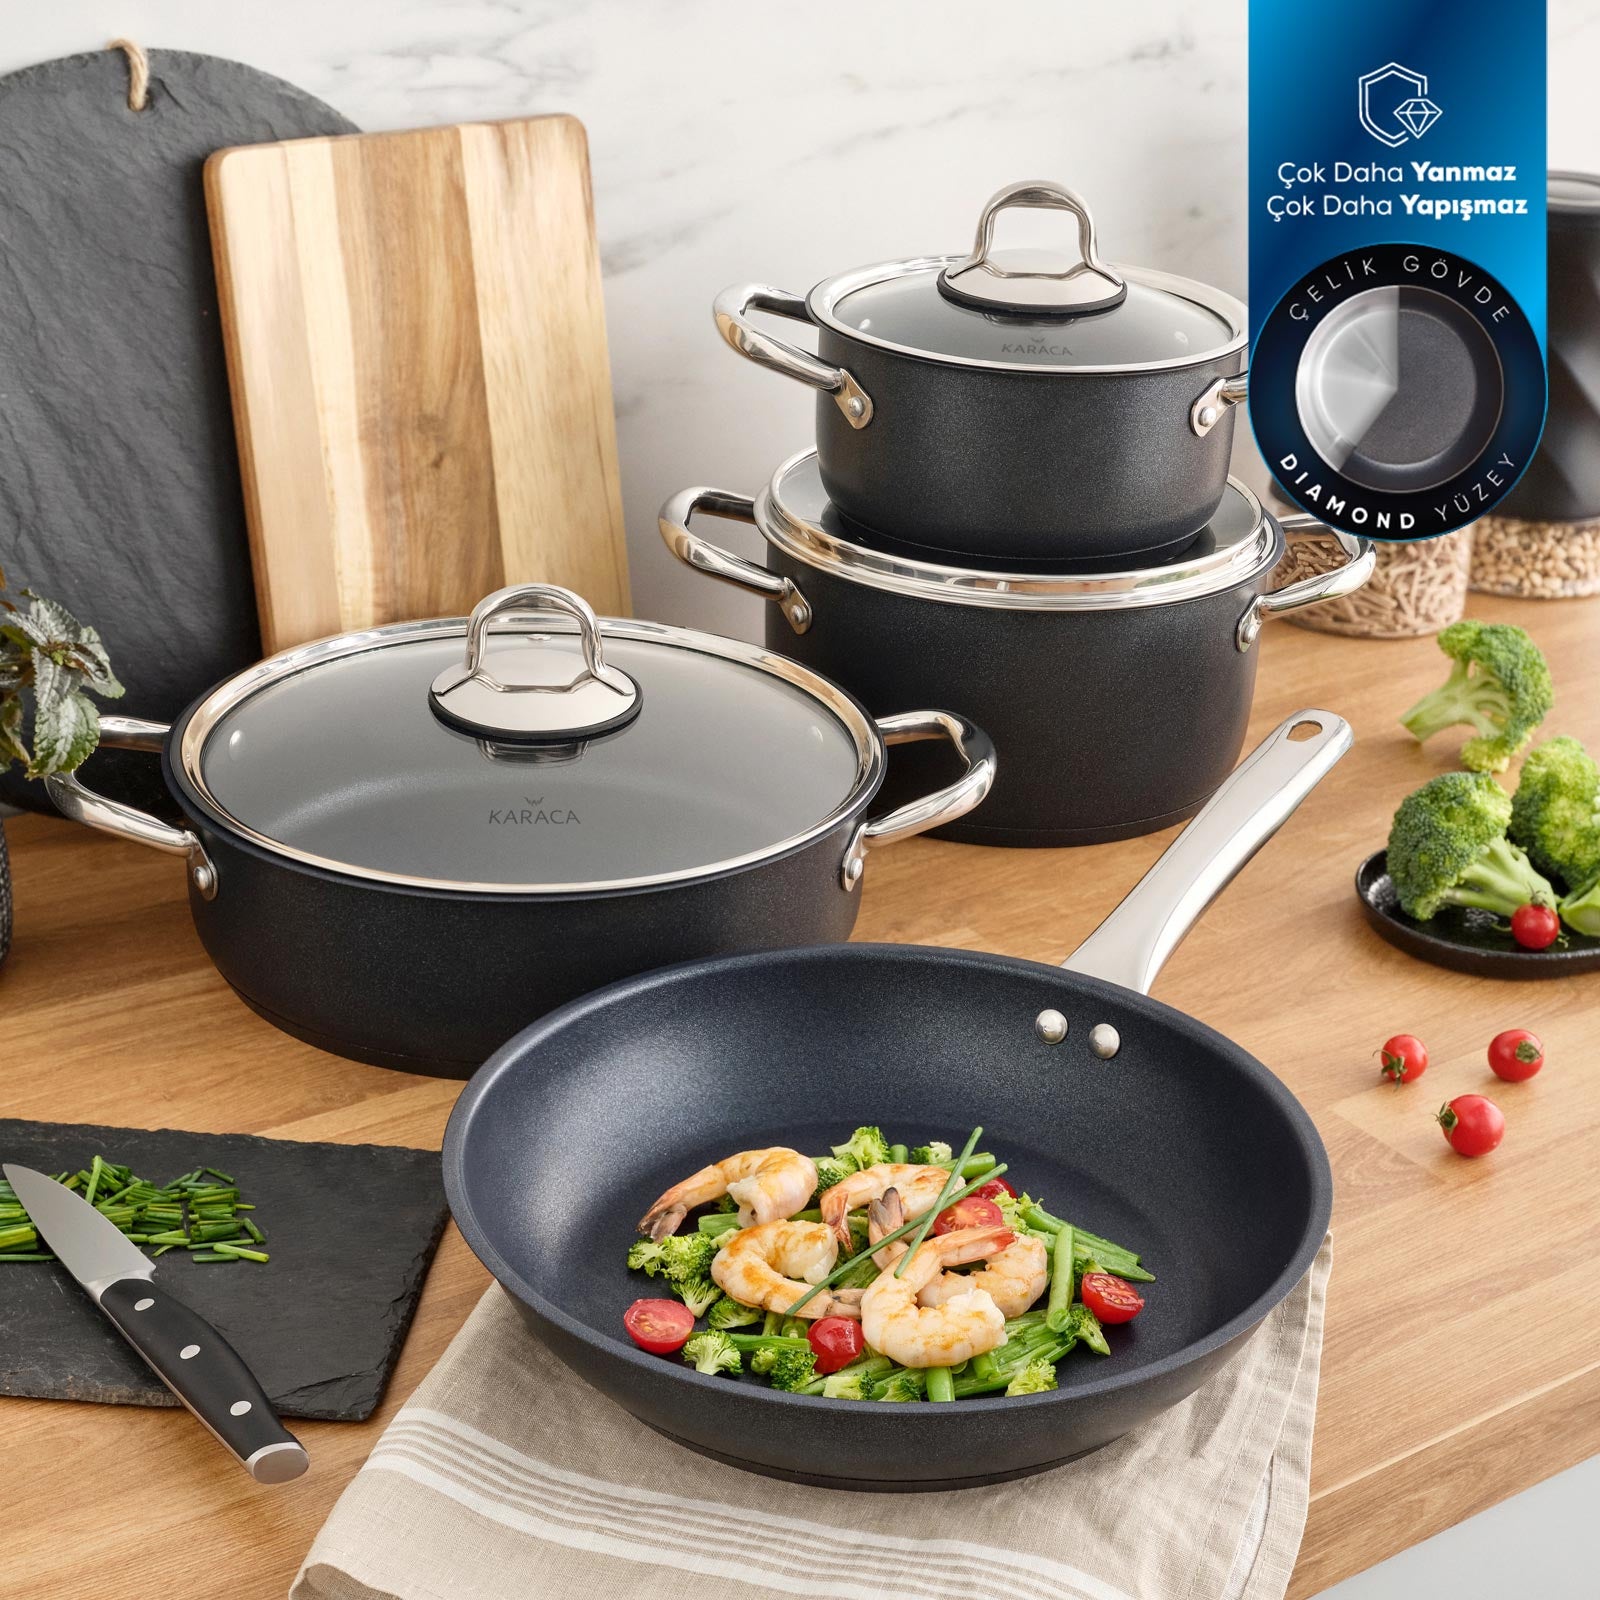 6 pieces nonstick cookware set granite 2022 hot selling cooking